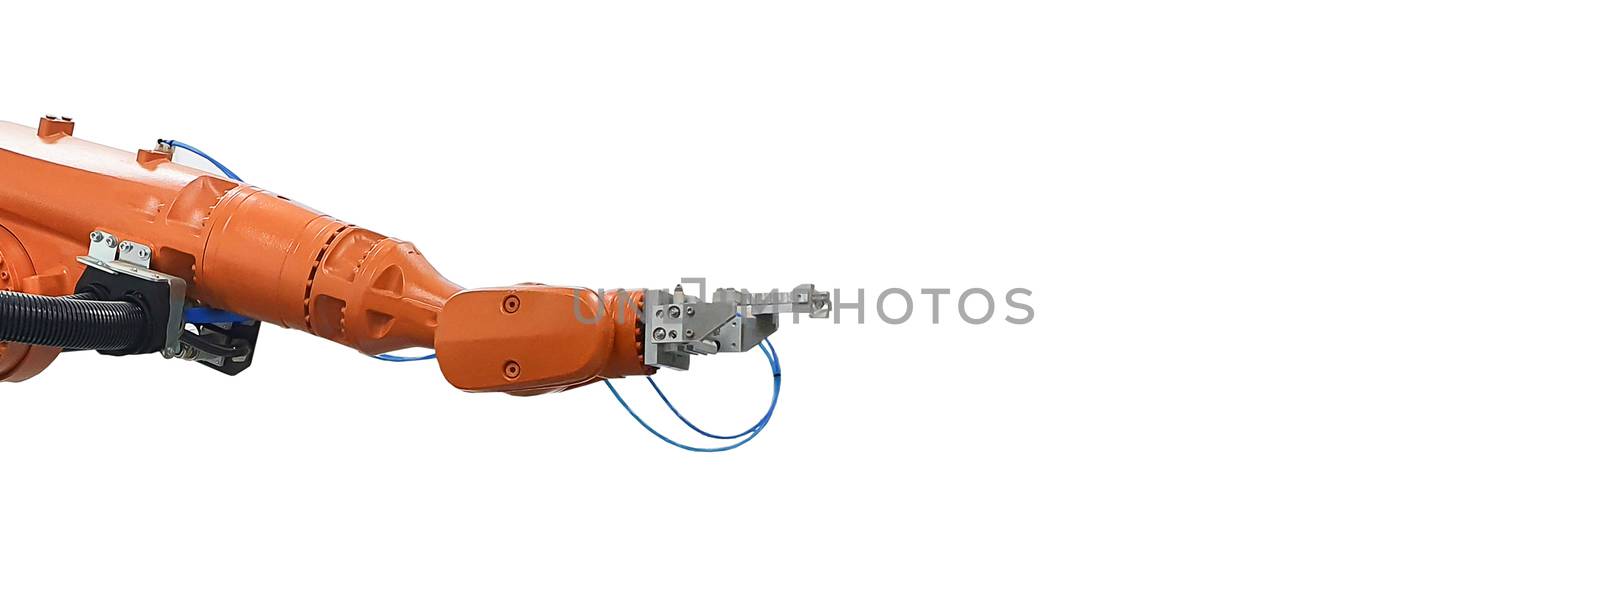 Industrial robot mechanical arm on white background by sompongtom